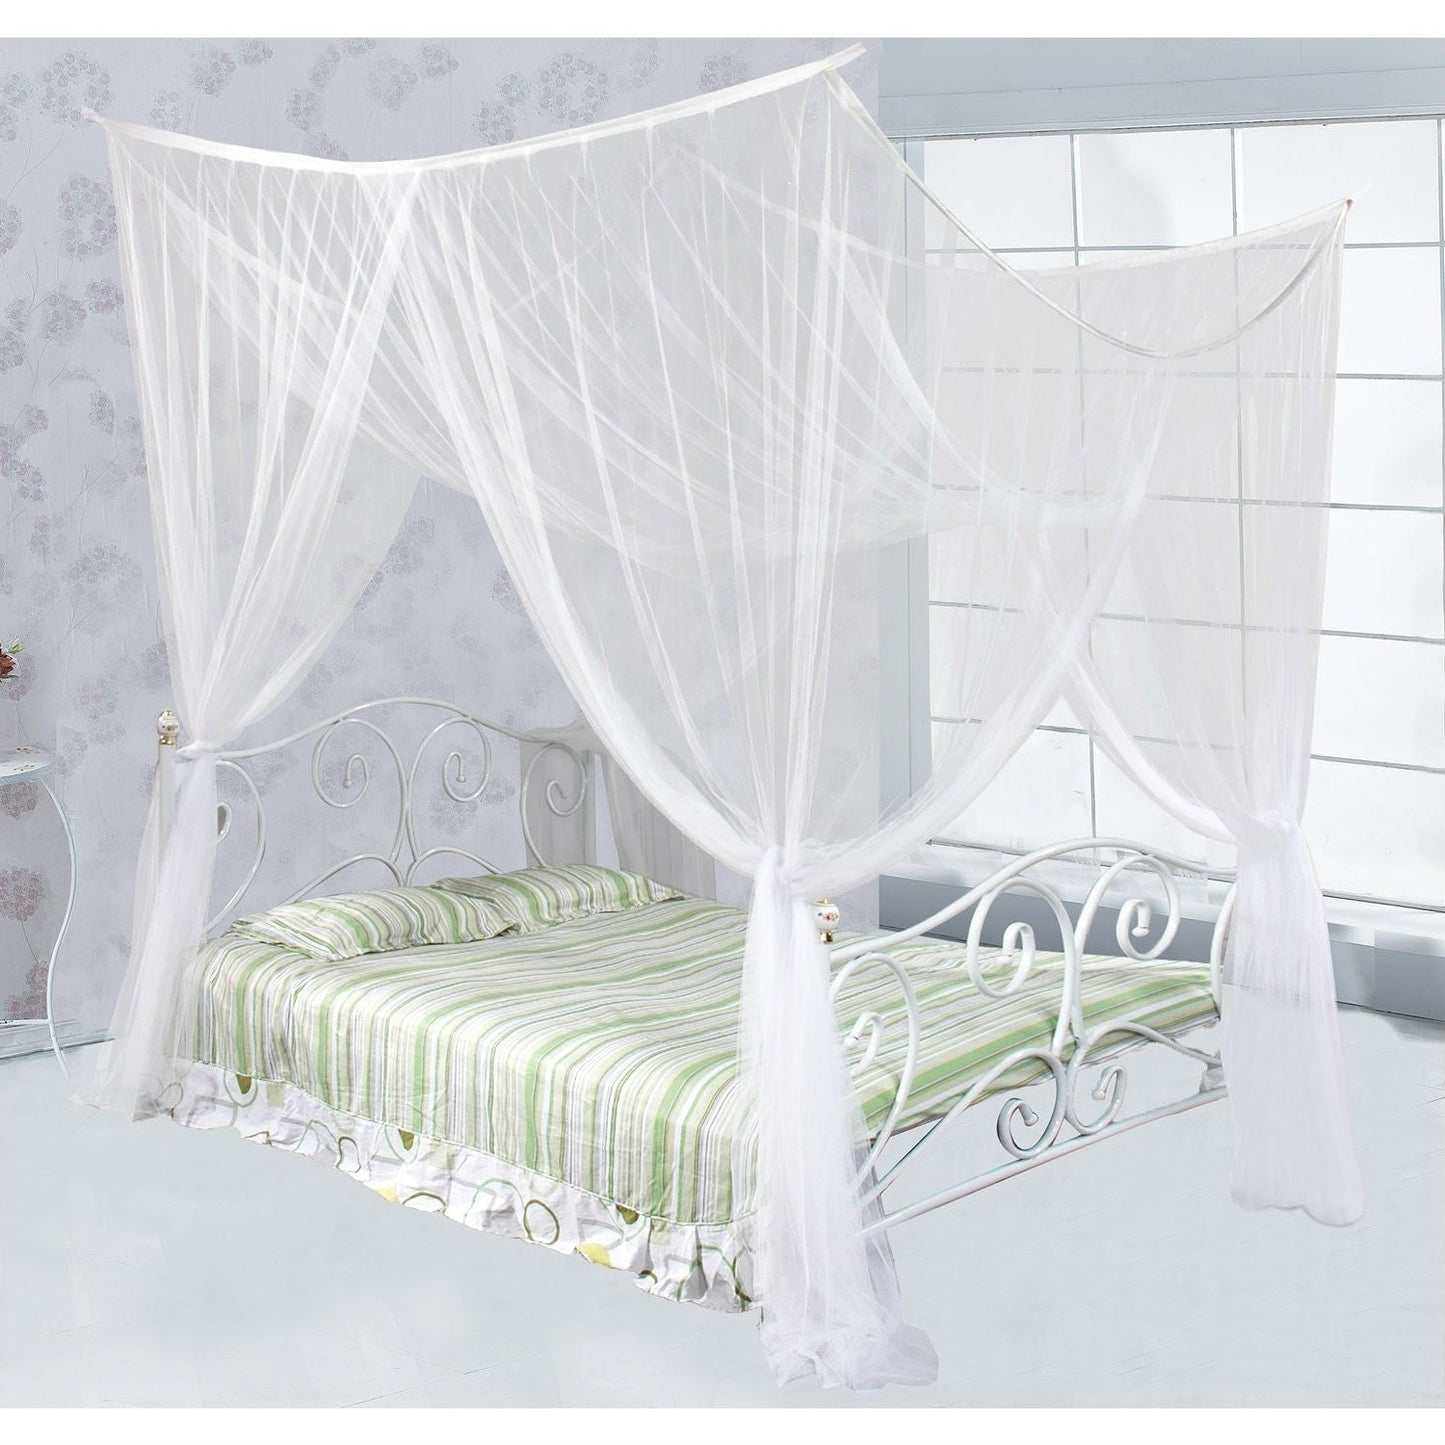 Bedroom > Bed Frames > Canopy Beds - White Mosquito Net Bed Canopy Mesh Netting - Size Full Queen King